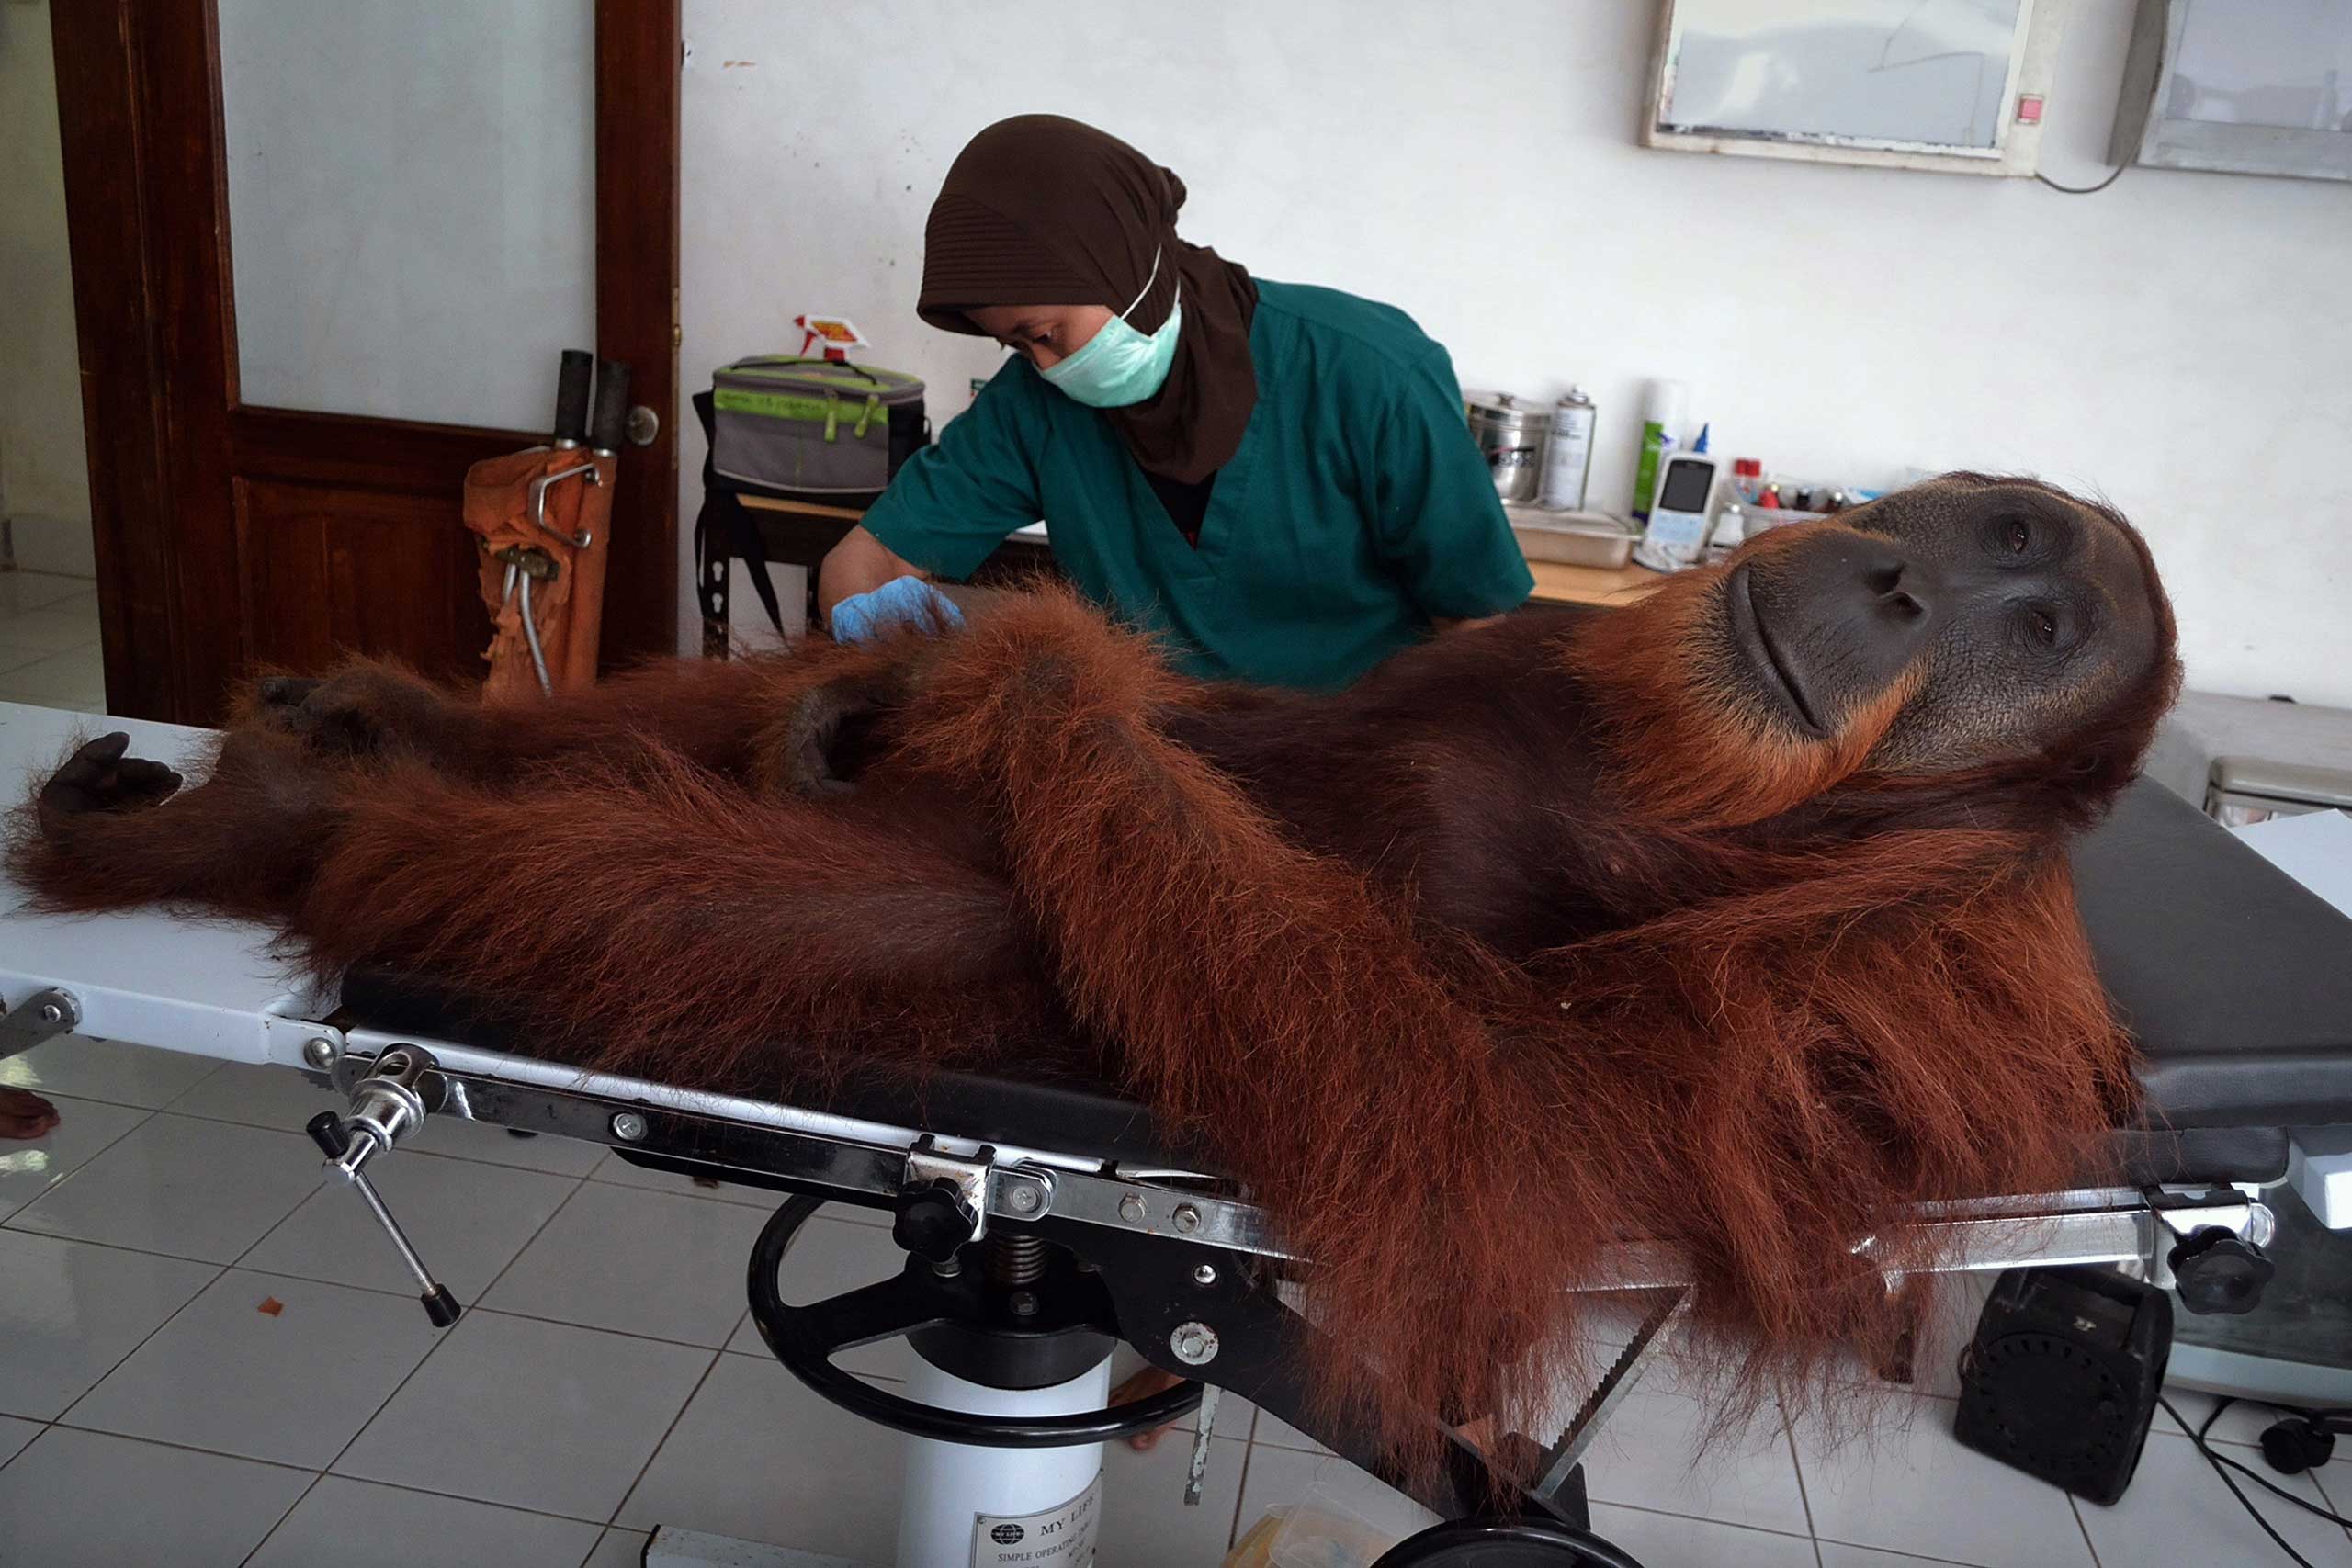 A veterinary staff member at an orangutan conservation center conducts medical examinations on an  orangutan found with air gun metal pellets embedded in his body in Sibolangit district, northern Sumatra, Indonesia, April 16, 2014.